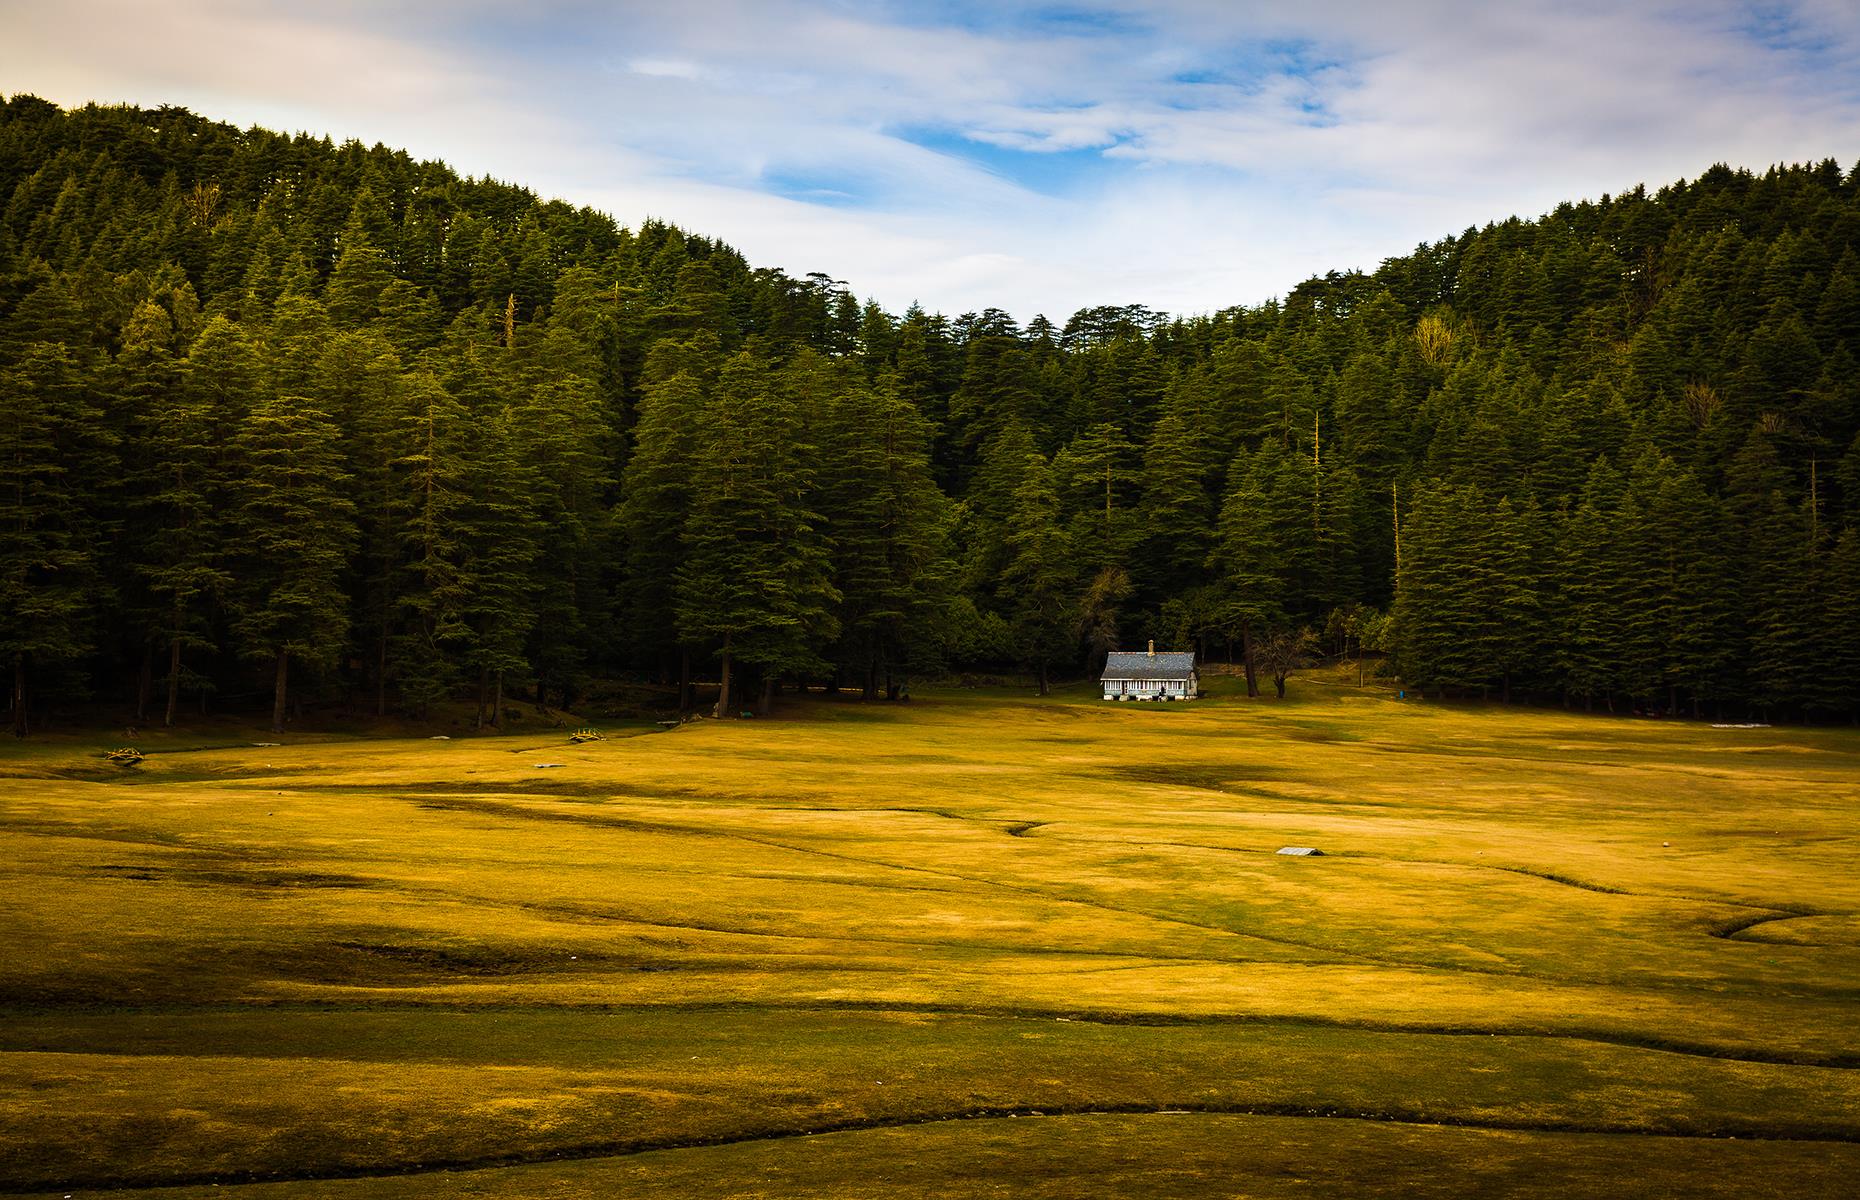 <p>This scene looks more reminiscent of the forests of Alpine Europe or even Scotland, but it is indeed India. Khajjiar is a small meadow in the Chamba Valley, surrounded by lush deodar forests and regularly cited as India's "mini Switzerland" thanks to its lakes, mountains, and prairies.</p>  <p>A prime picnic spot, it's a gorgeous place to stop if you're hiking around Dalhousie in Himachal Pradesh.</p>